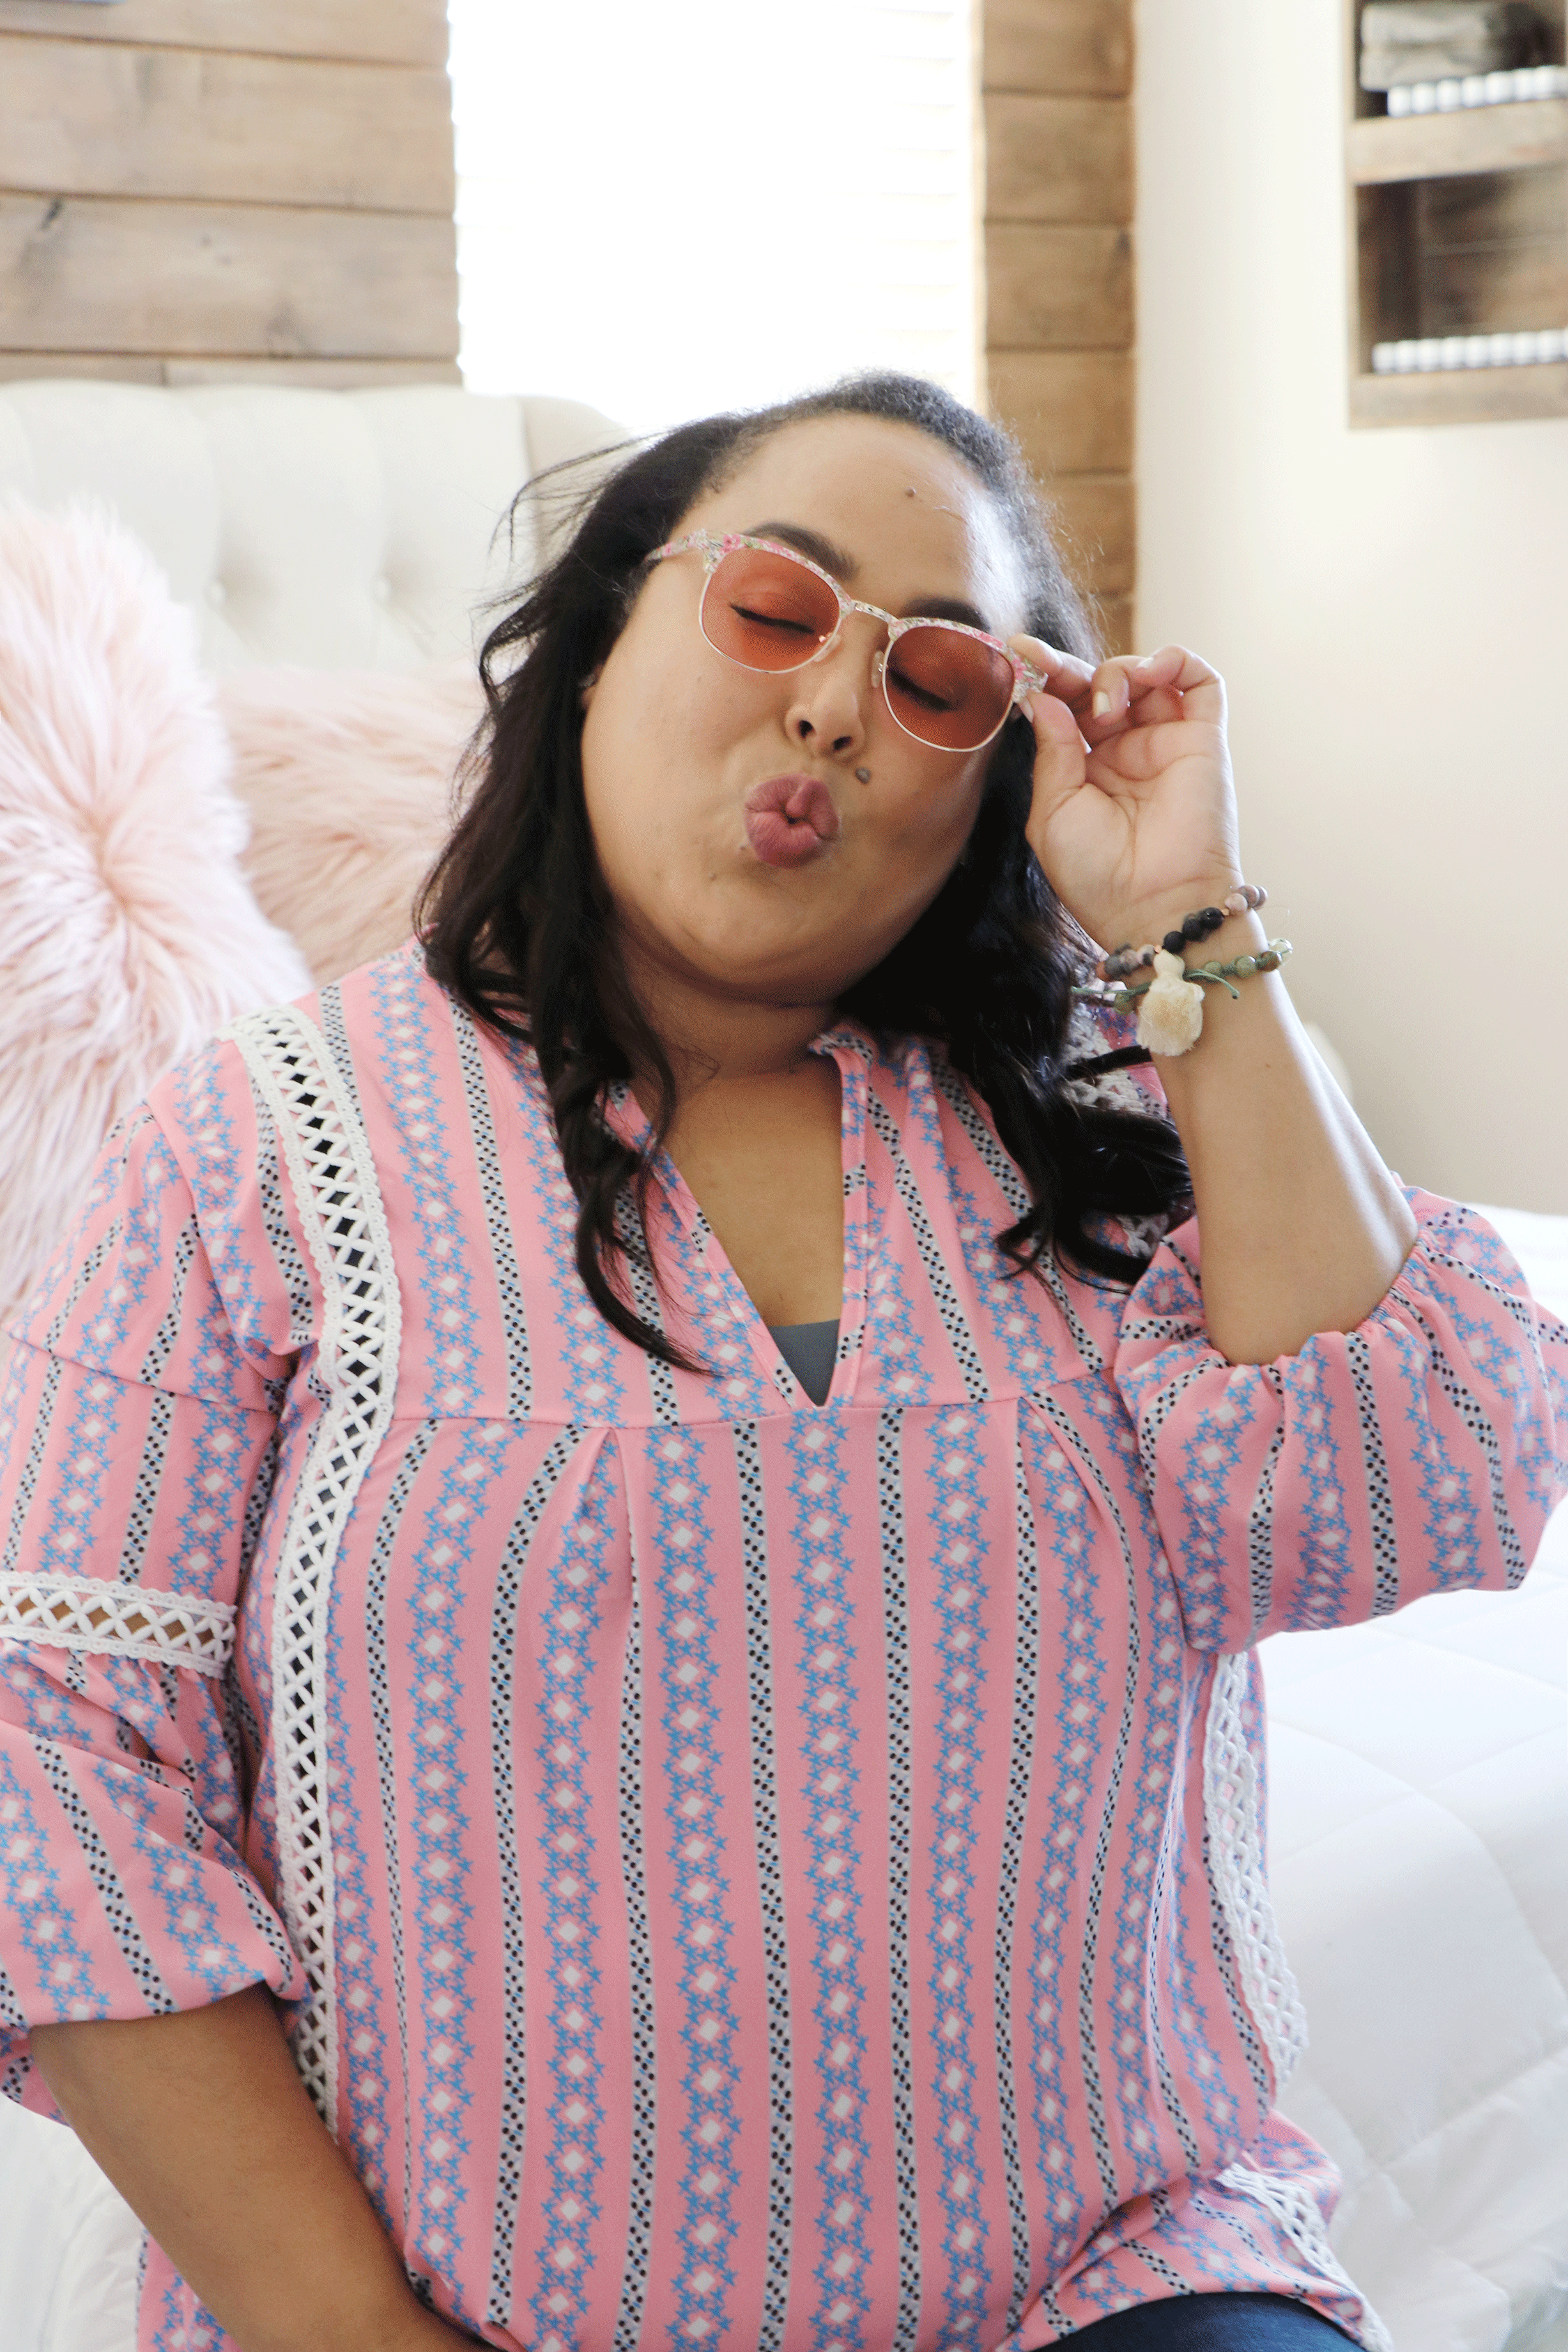 Summer is around the corner which means time for warm weather. Los Angeles blogger Makeup Life and Love is sharing her top warm weather finds HERE!